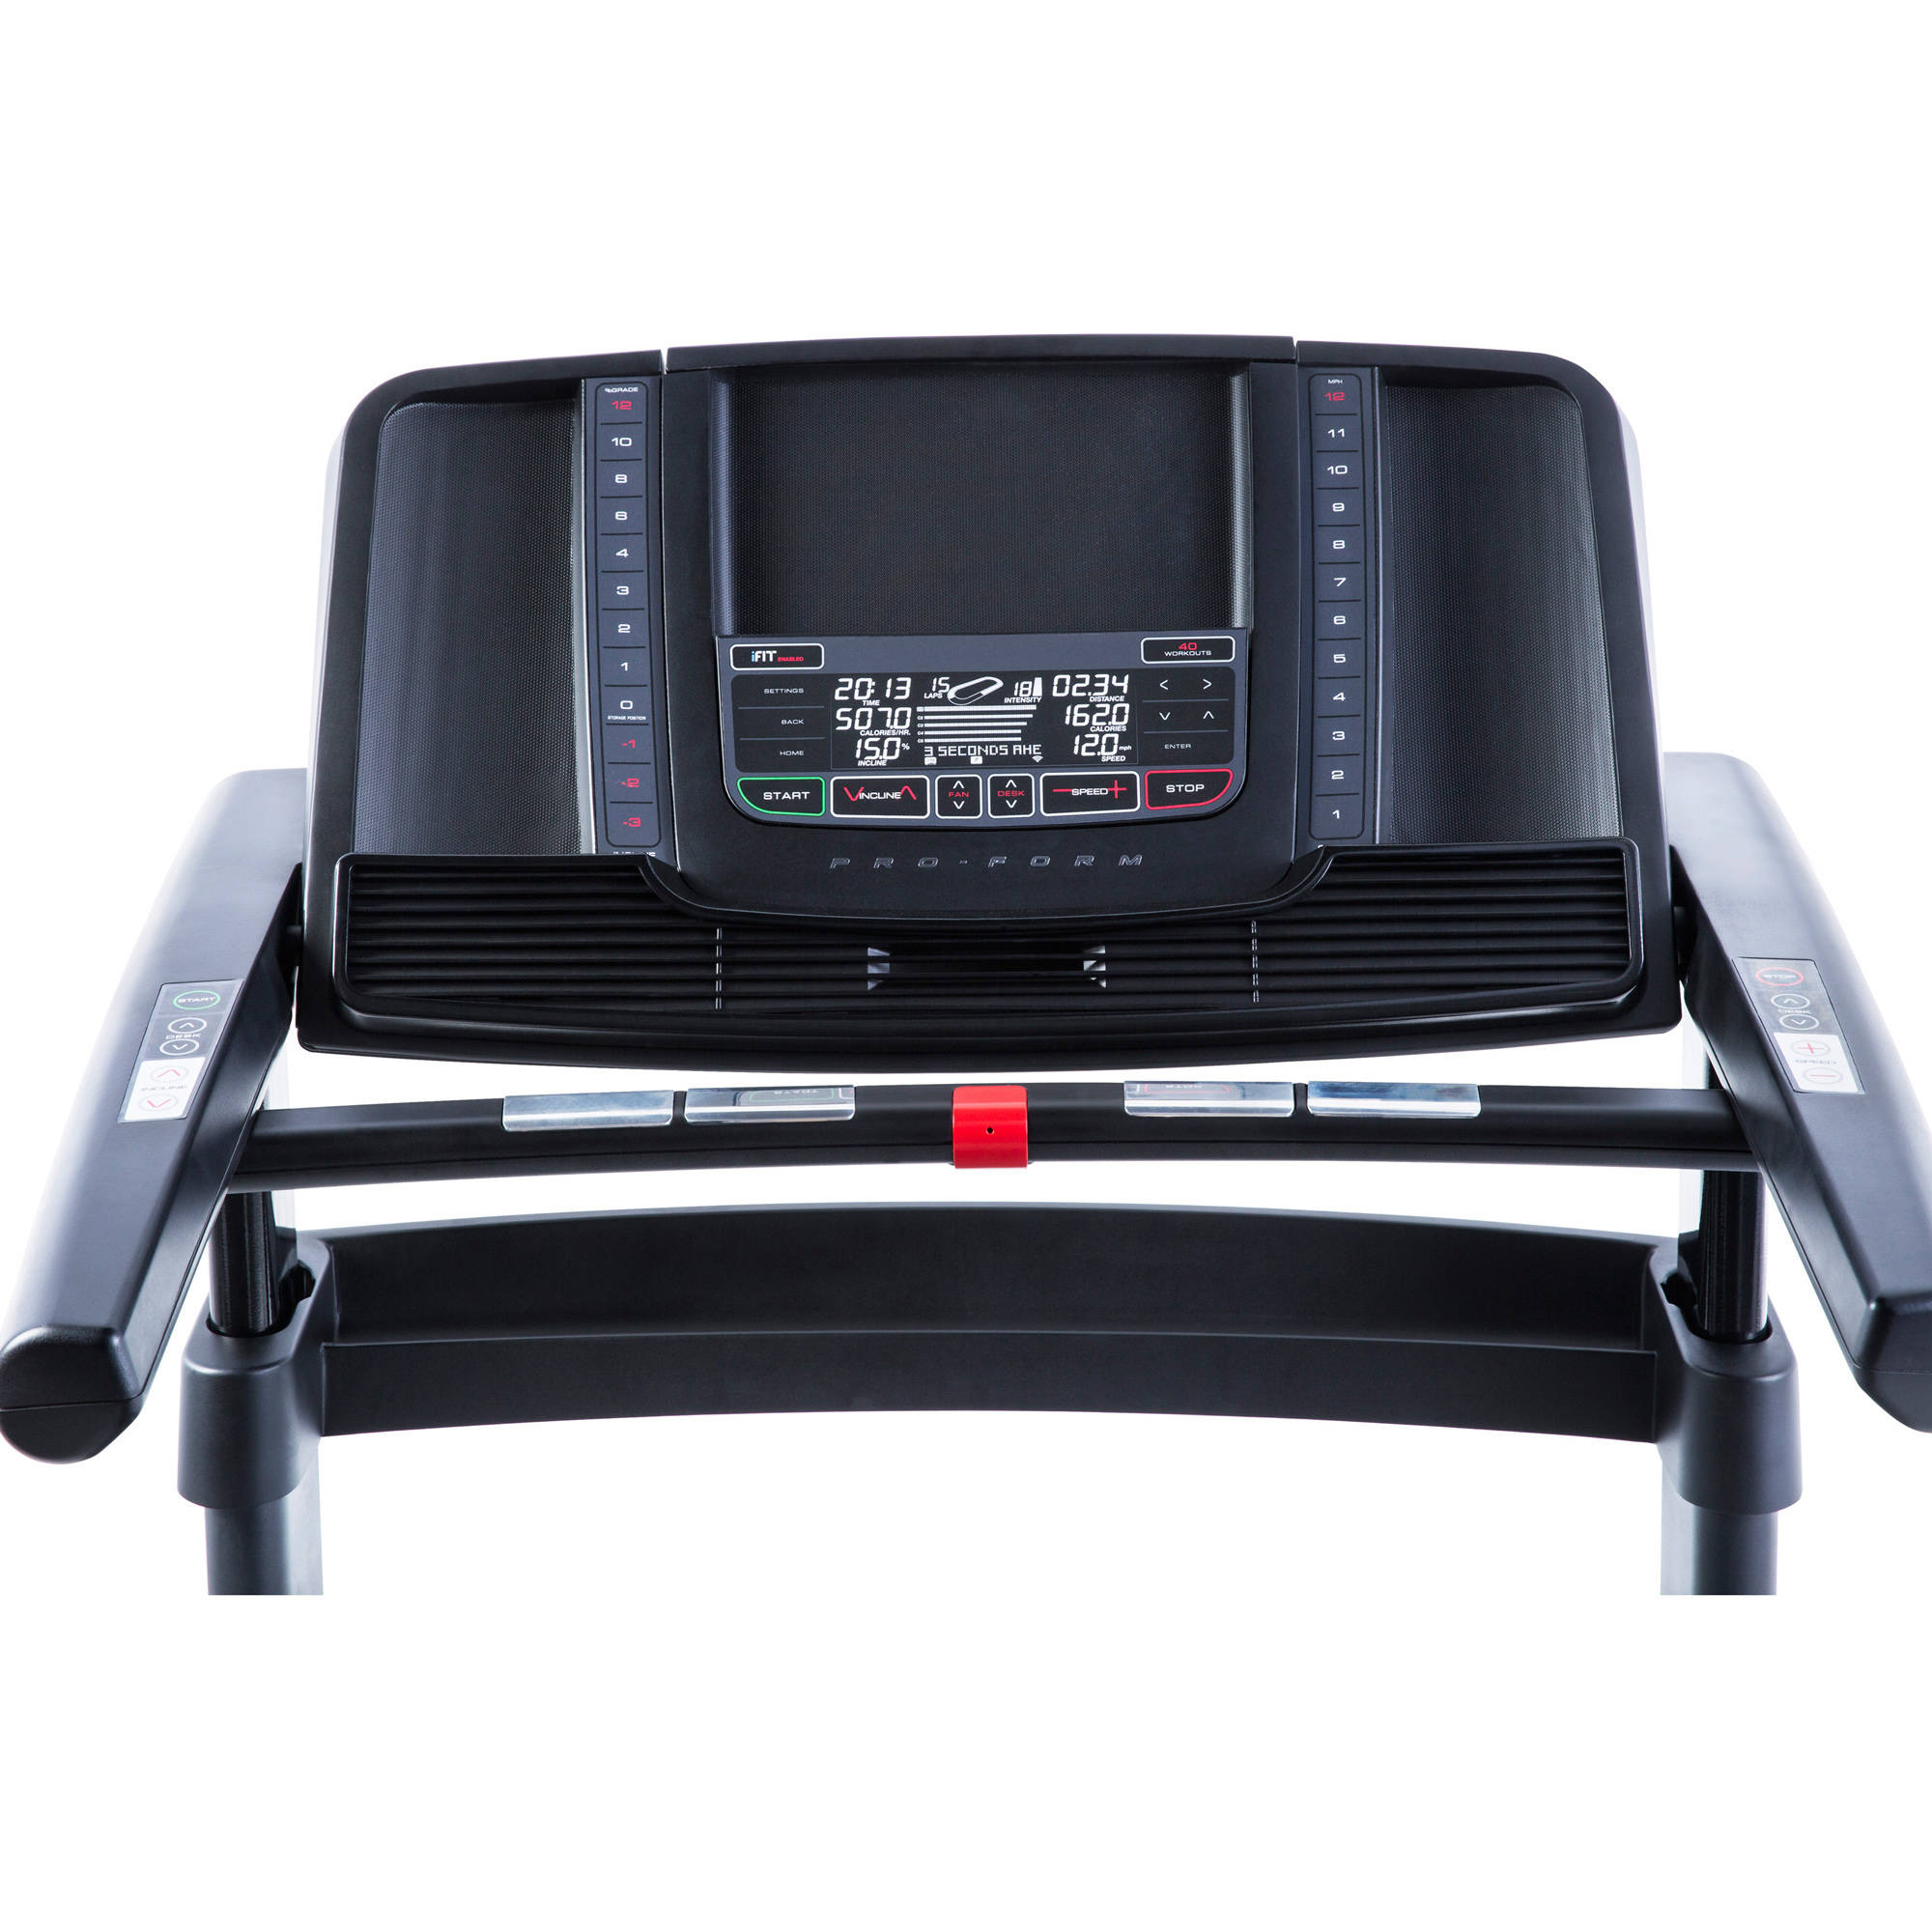 Profrom Performance 140 Treadmill - image 5 of 11